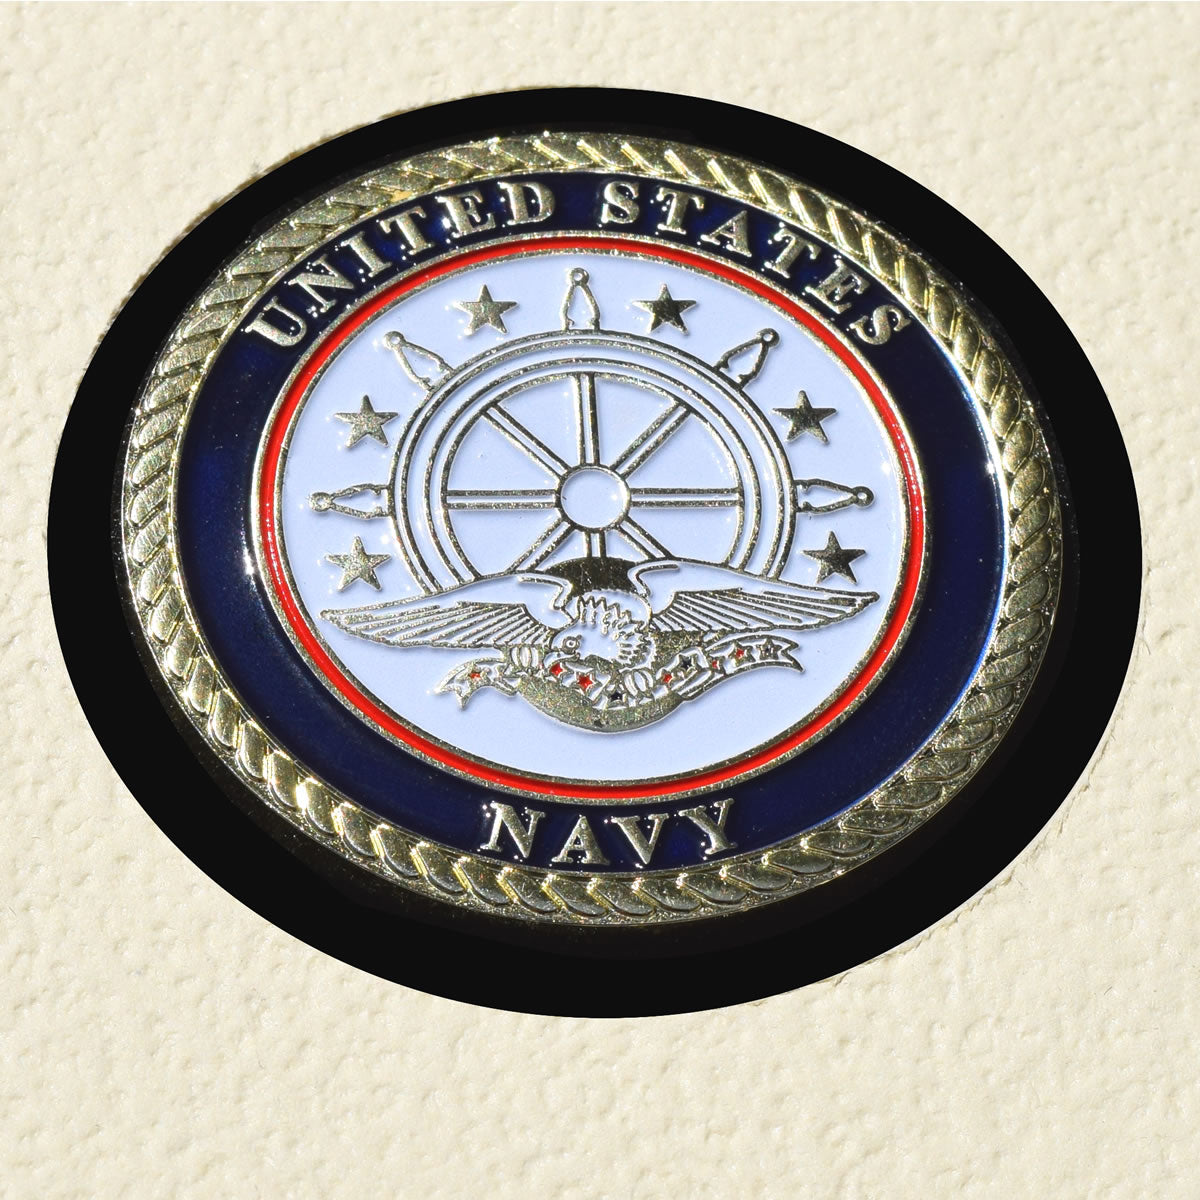 USS MANLEY DD-940 Detailed Coin